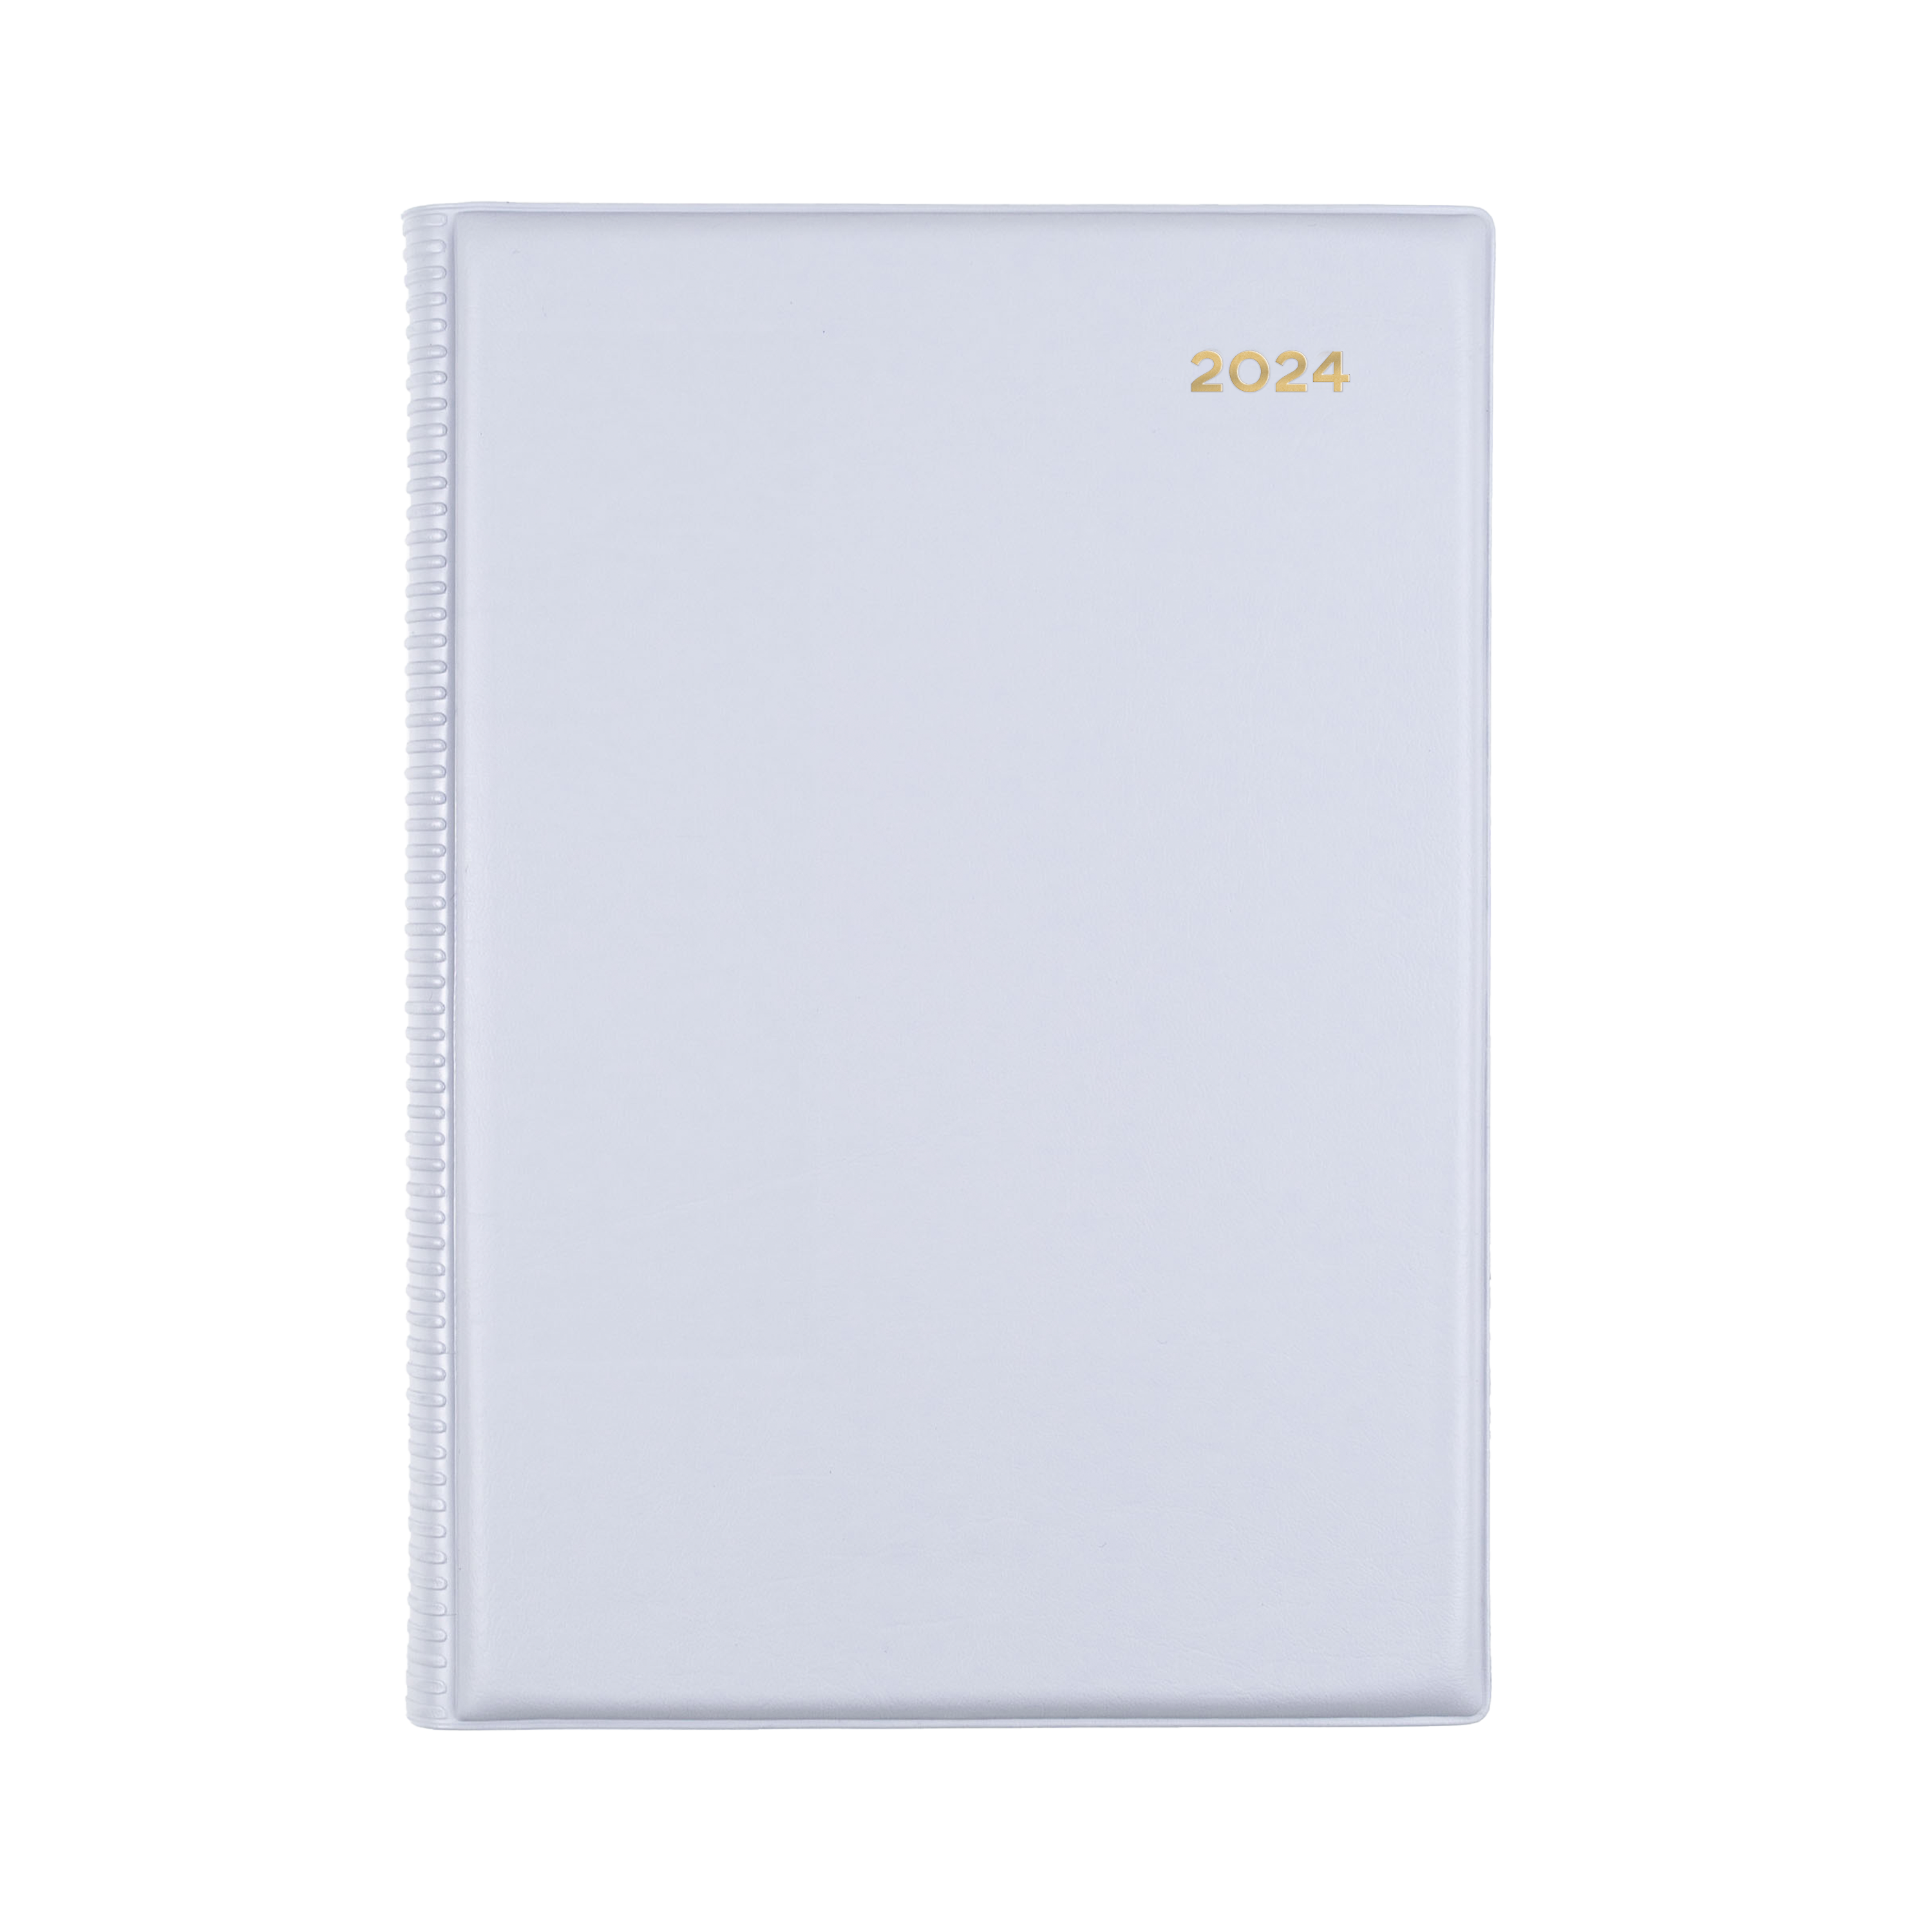 Belmont Colours 2024 Diary - Week to View, Size A5 Grey / A5 (210 x 148mm)